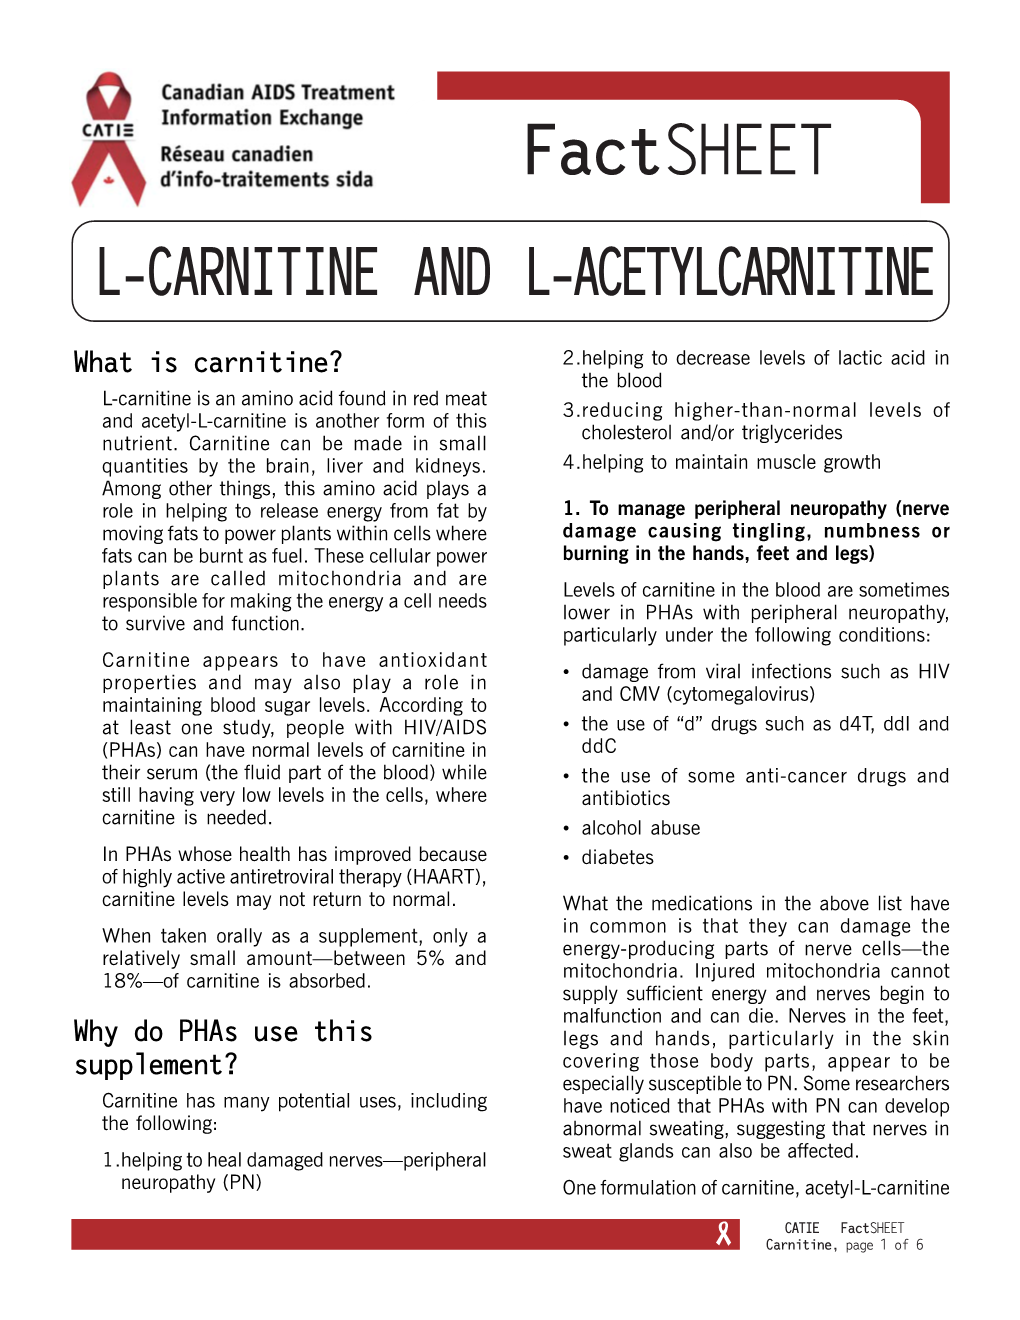 Factsheet L-CARNITINE and L-ACETYLCARNITINE